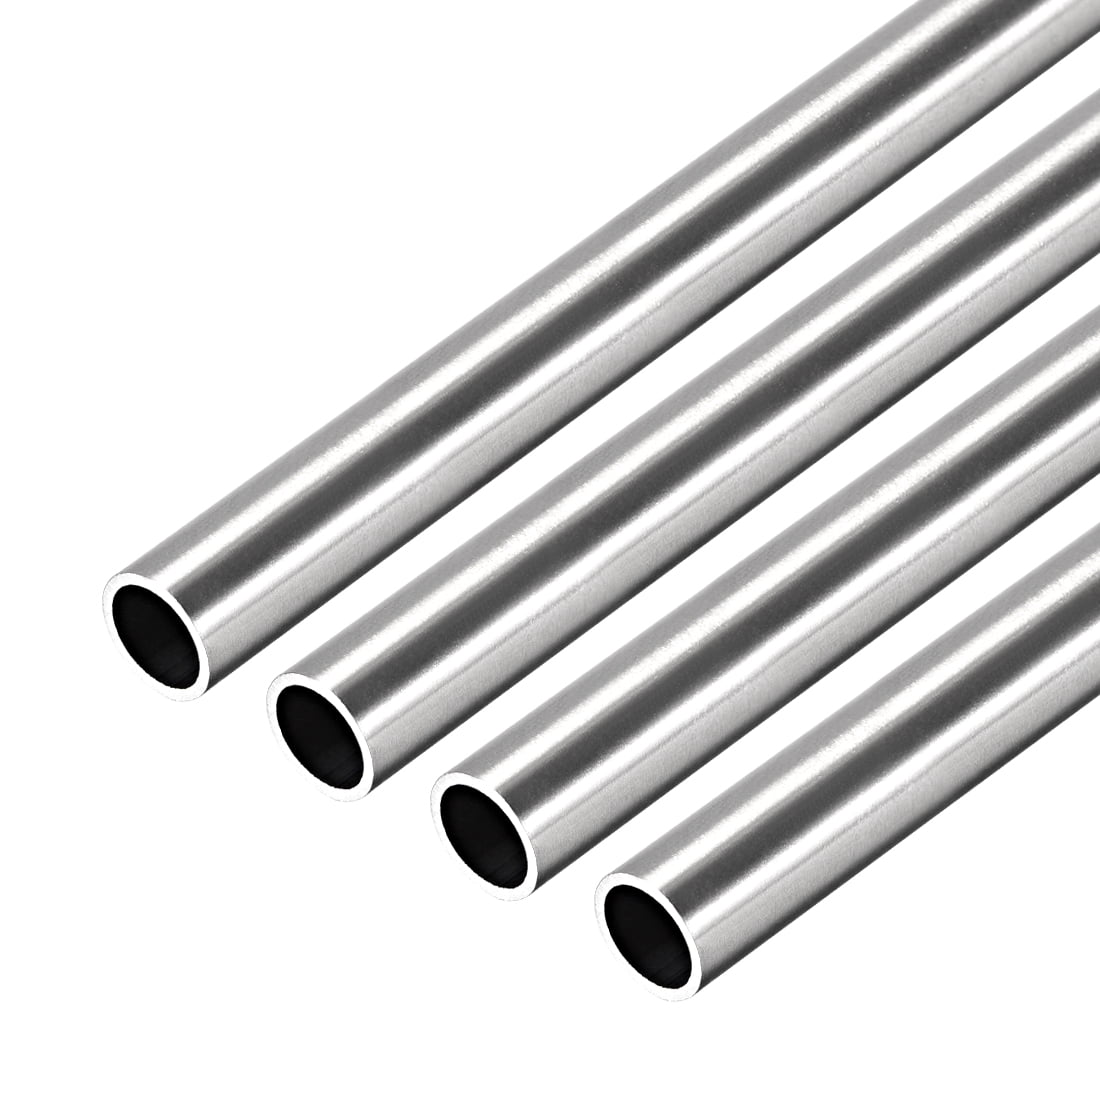 uxcell 304 Stainless Steel Round Tubing 9mm OD 0.4mm Wall Thickness 250mm Length Seamless Straight Pipe Tube 